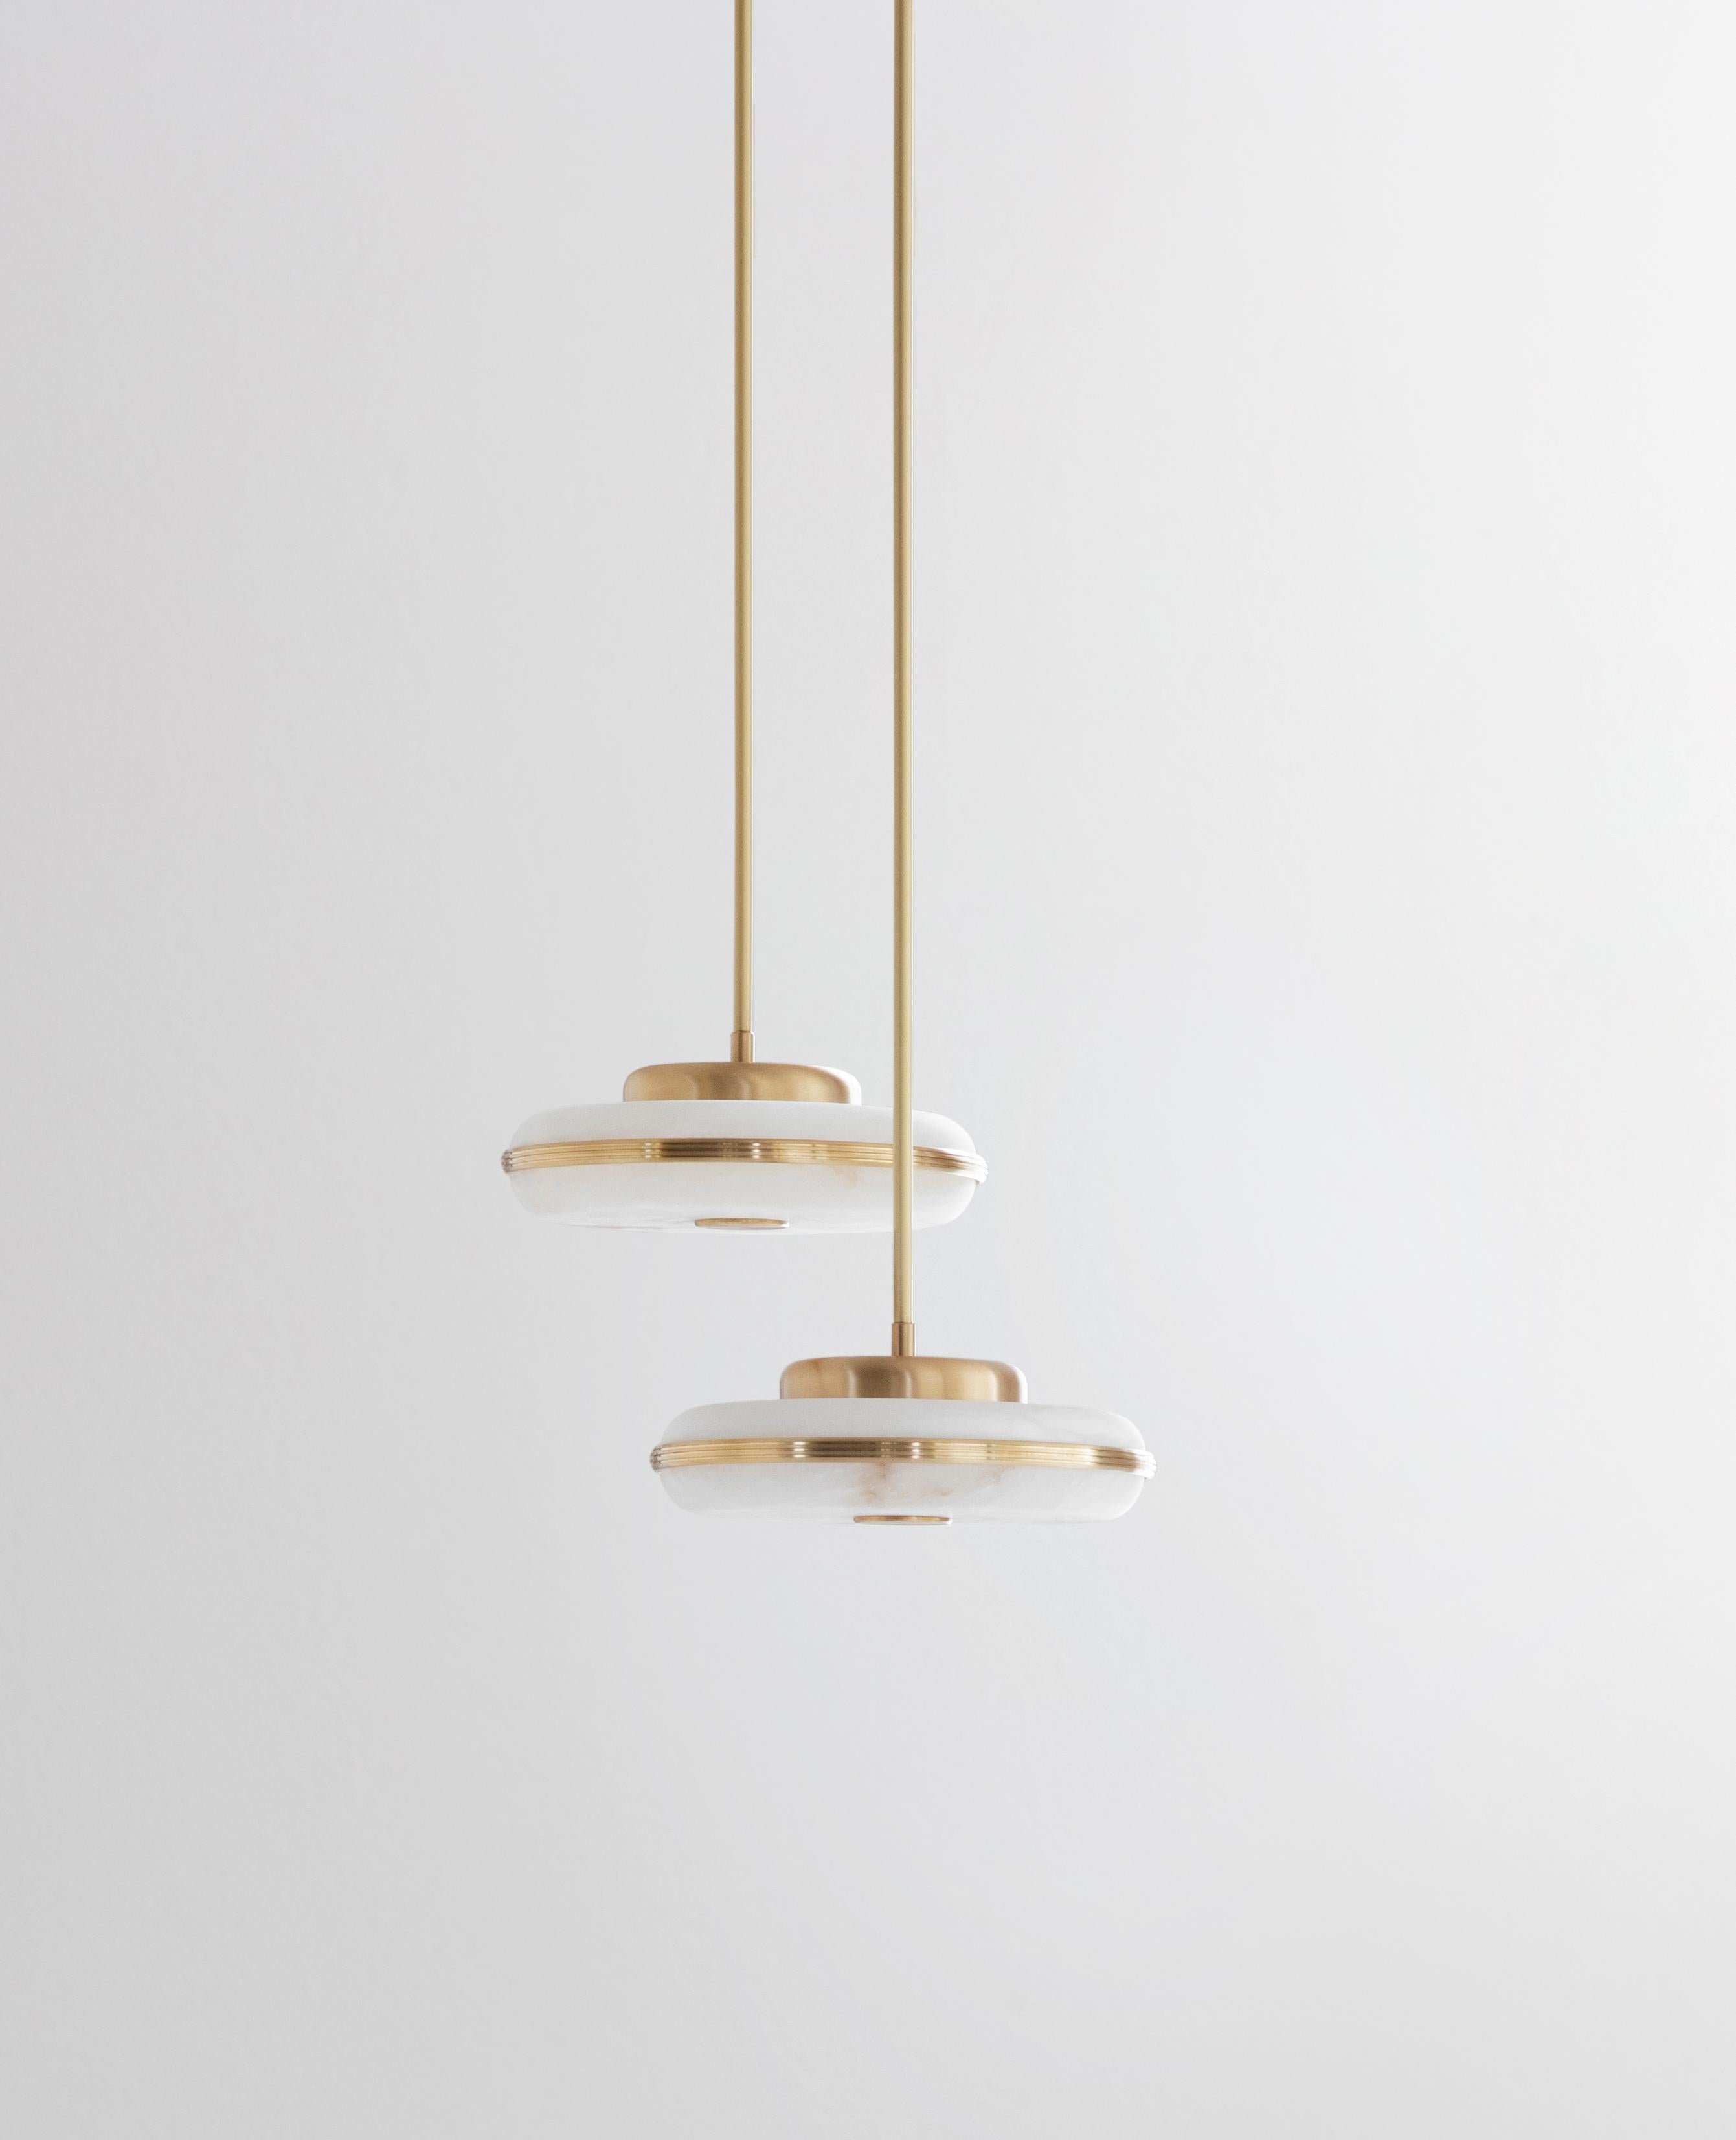 Beran Brushed Brass Small Pendant Lamp by Bert Frank
Dimensions: Ø 26 x H 6 cm. 
Materials: Brass and alabaster.

Available in two different sizes. Available in different finishes and materials. Height is customized to order. Please contact us.